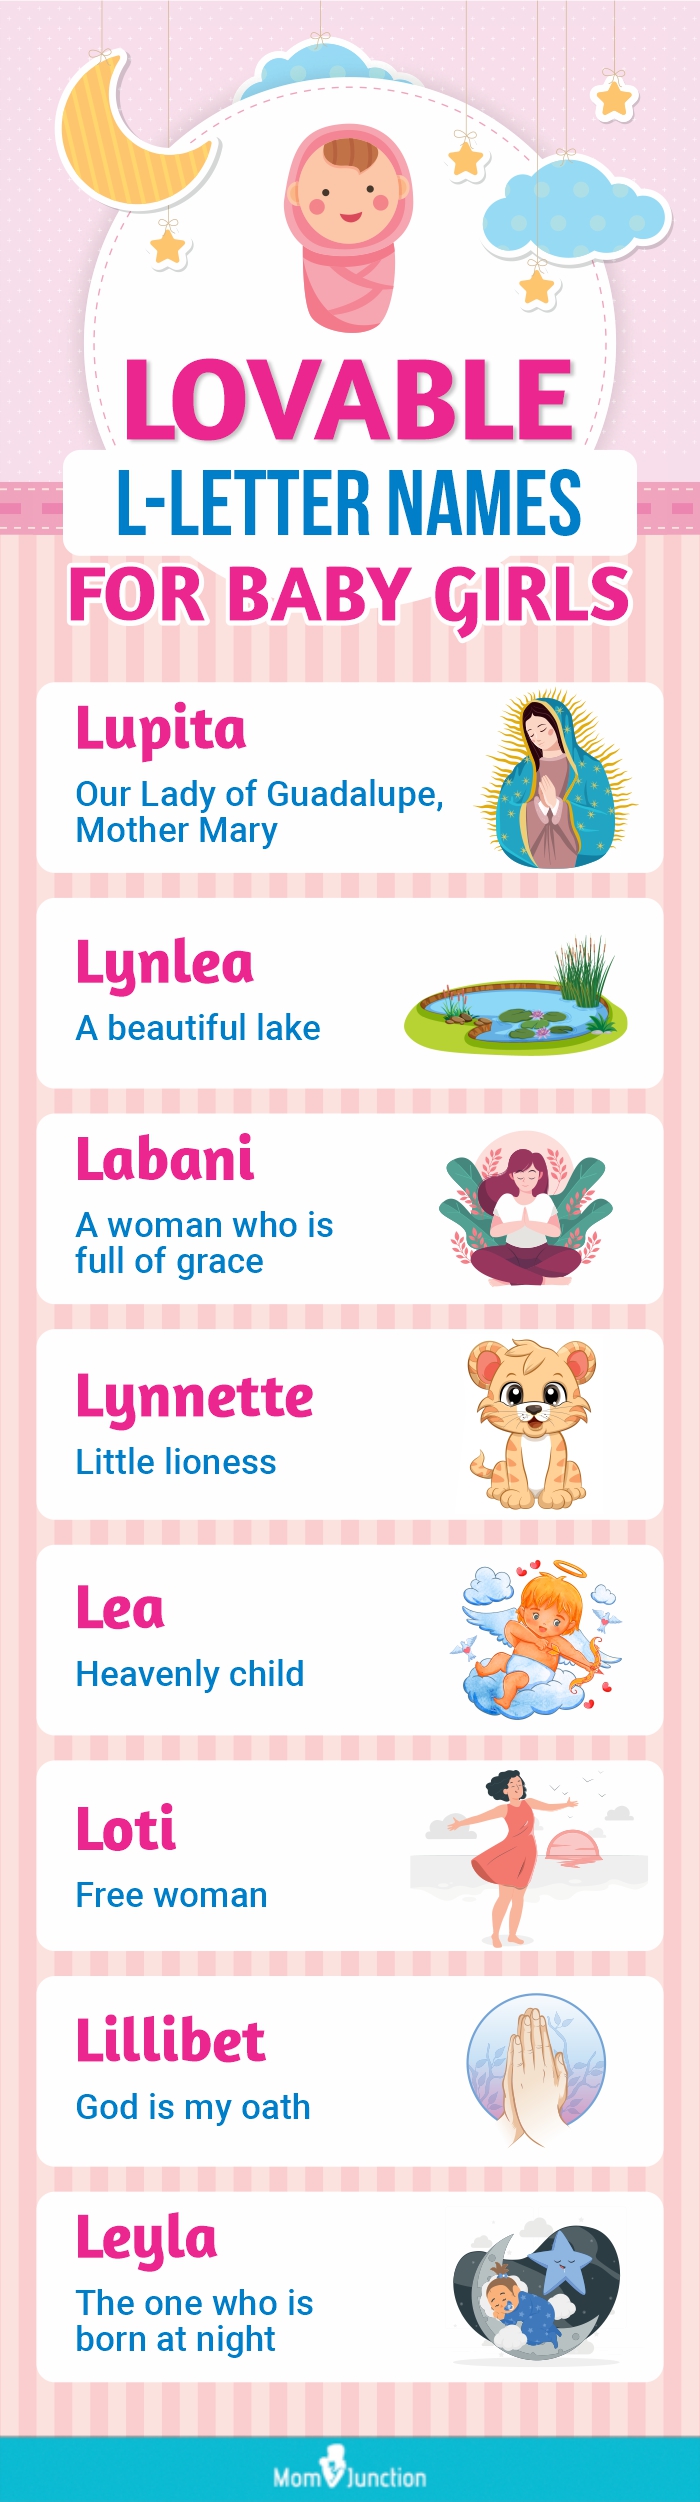 lovable l letter names for baby girls (infographic)